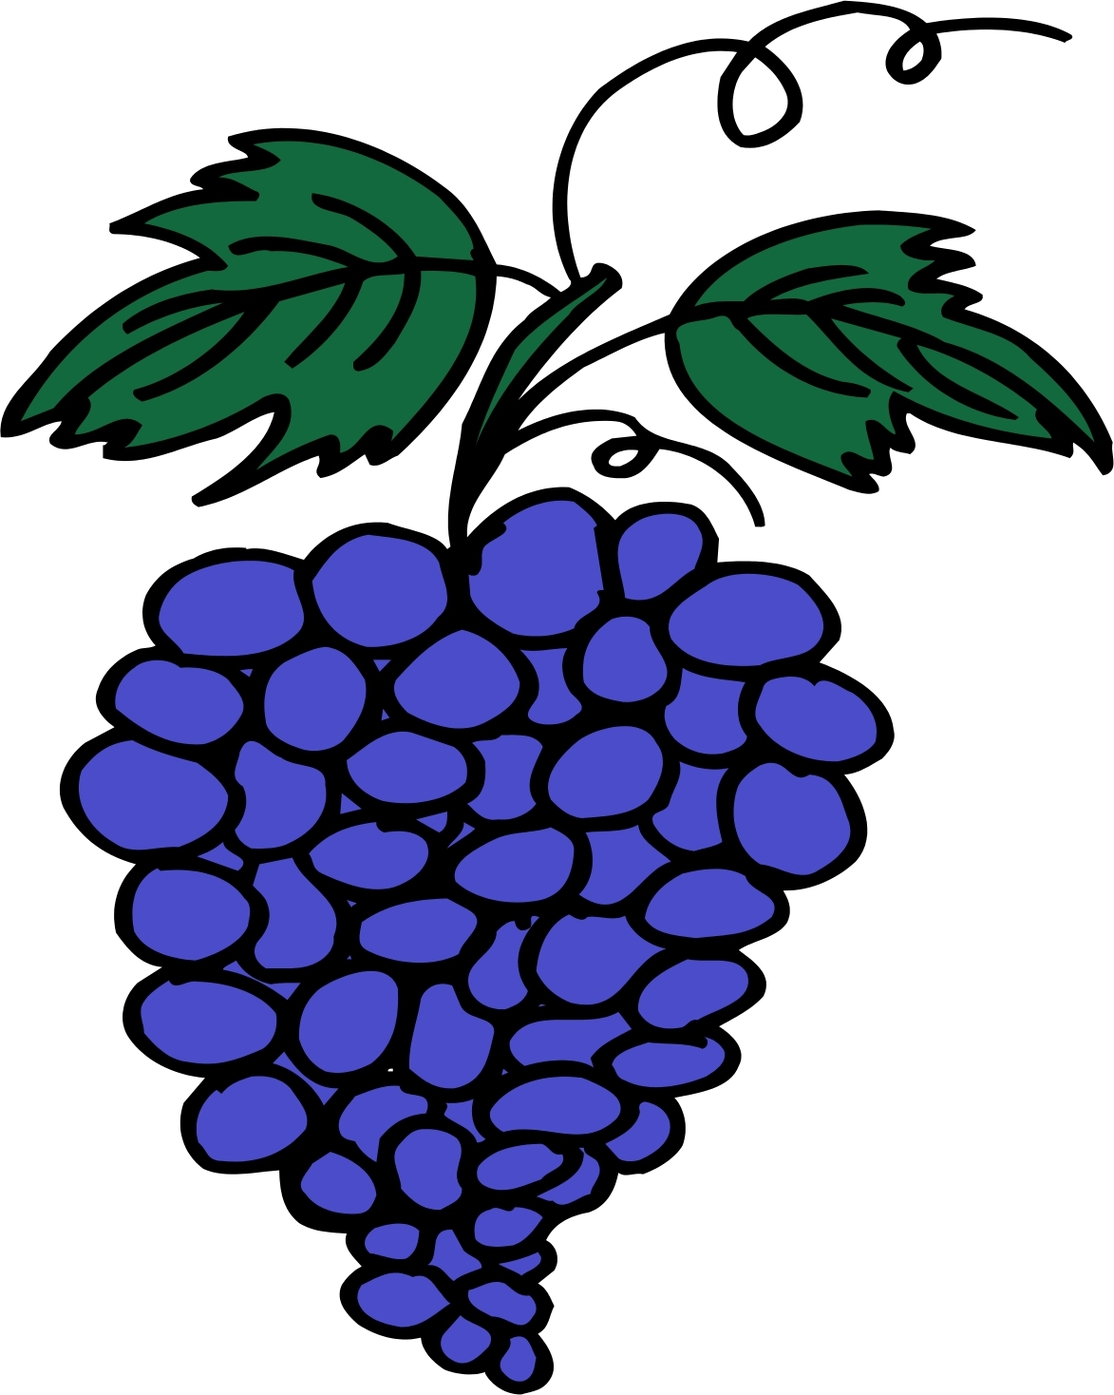 Cartoon Grapes Clipart - Free to use Clip Art Resource